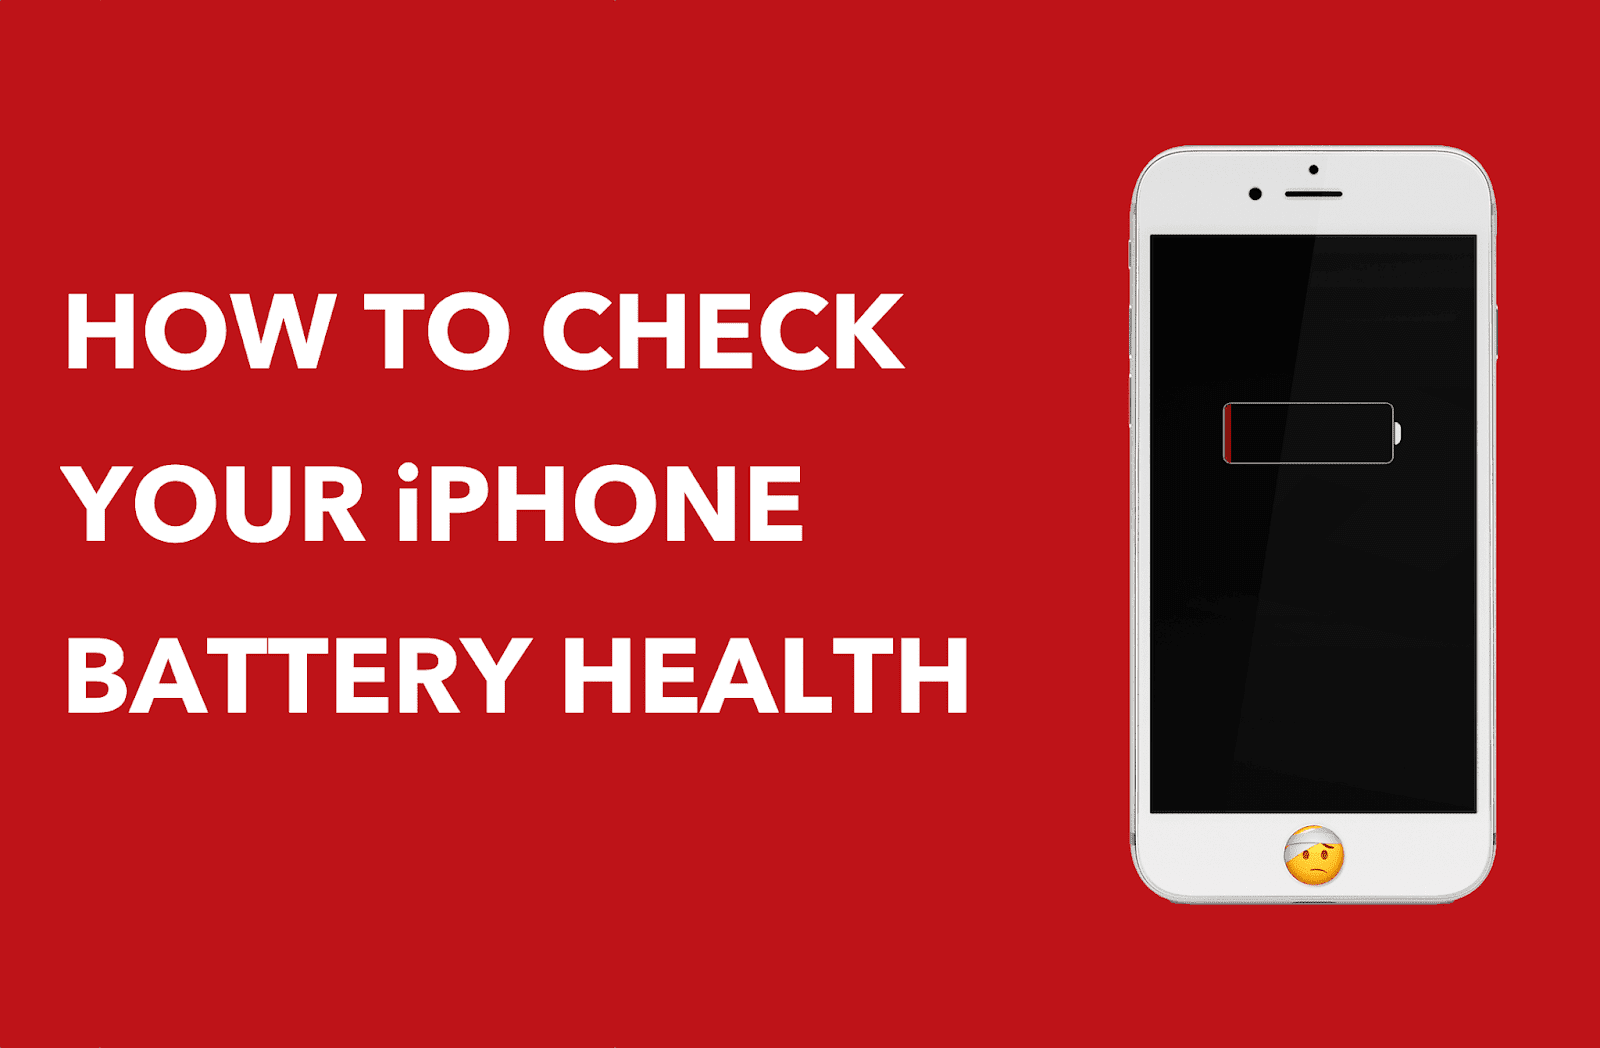 How to Check Your iPhone Battery Health